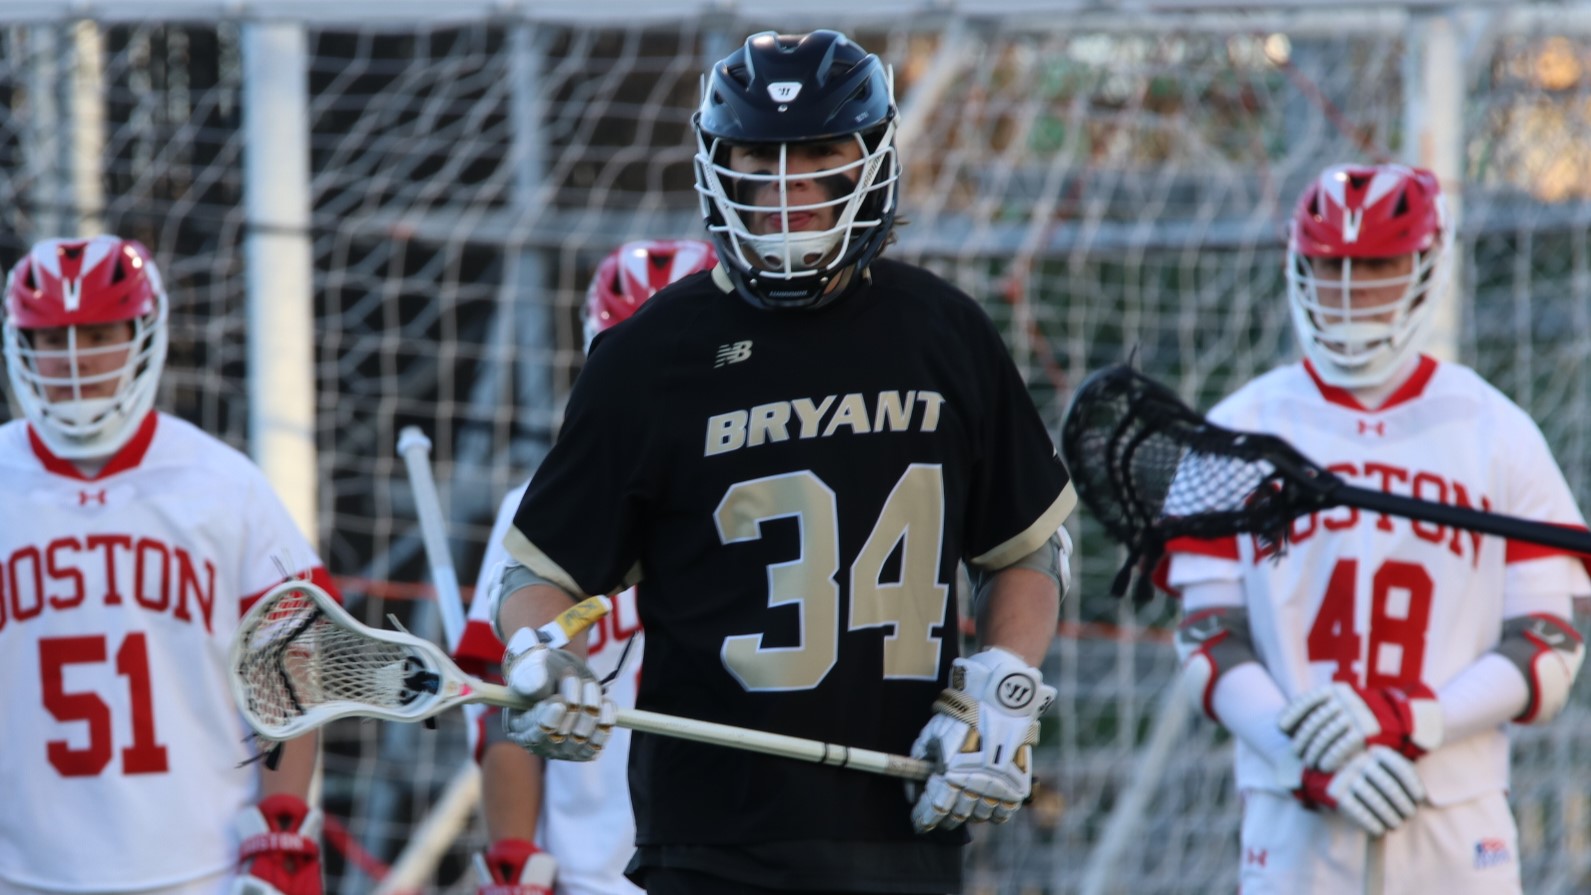 Bryant heads to Harvard for Tuesday night showdown under the lights